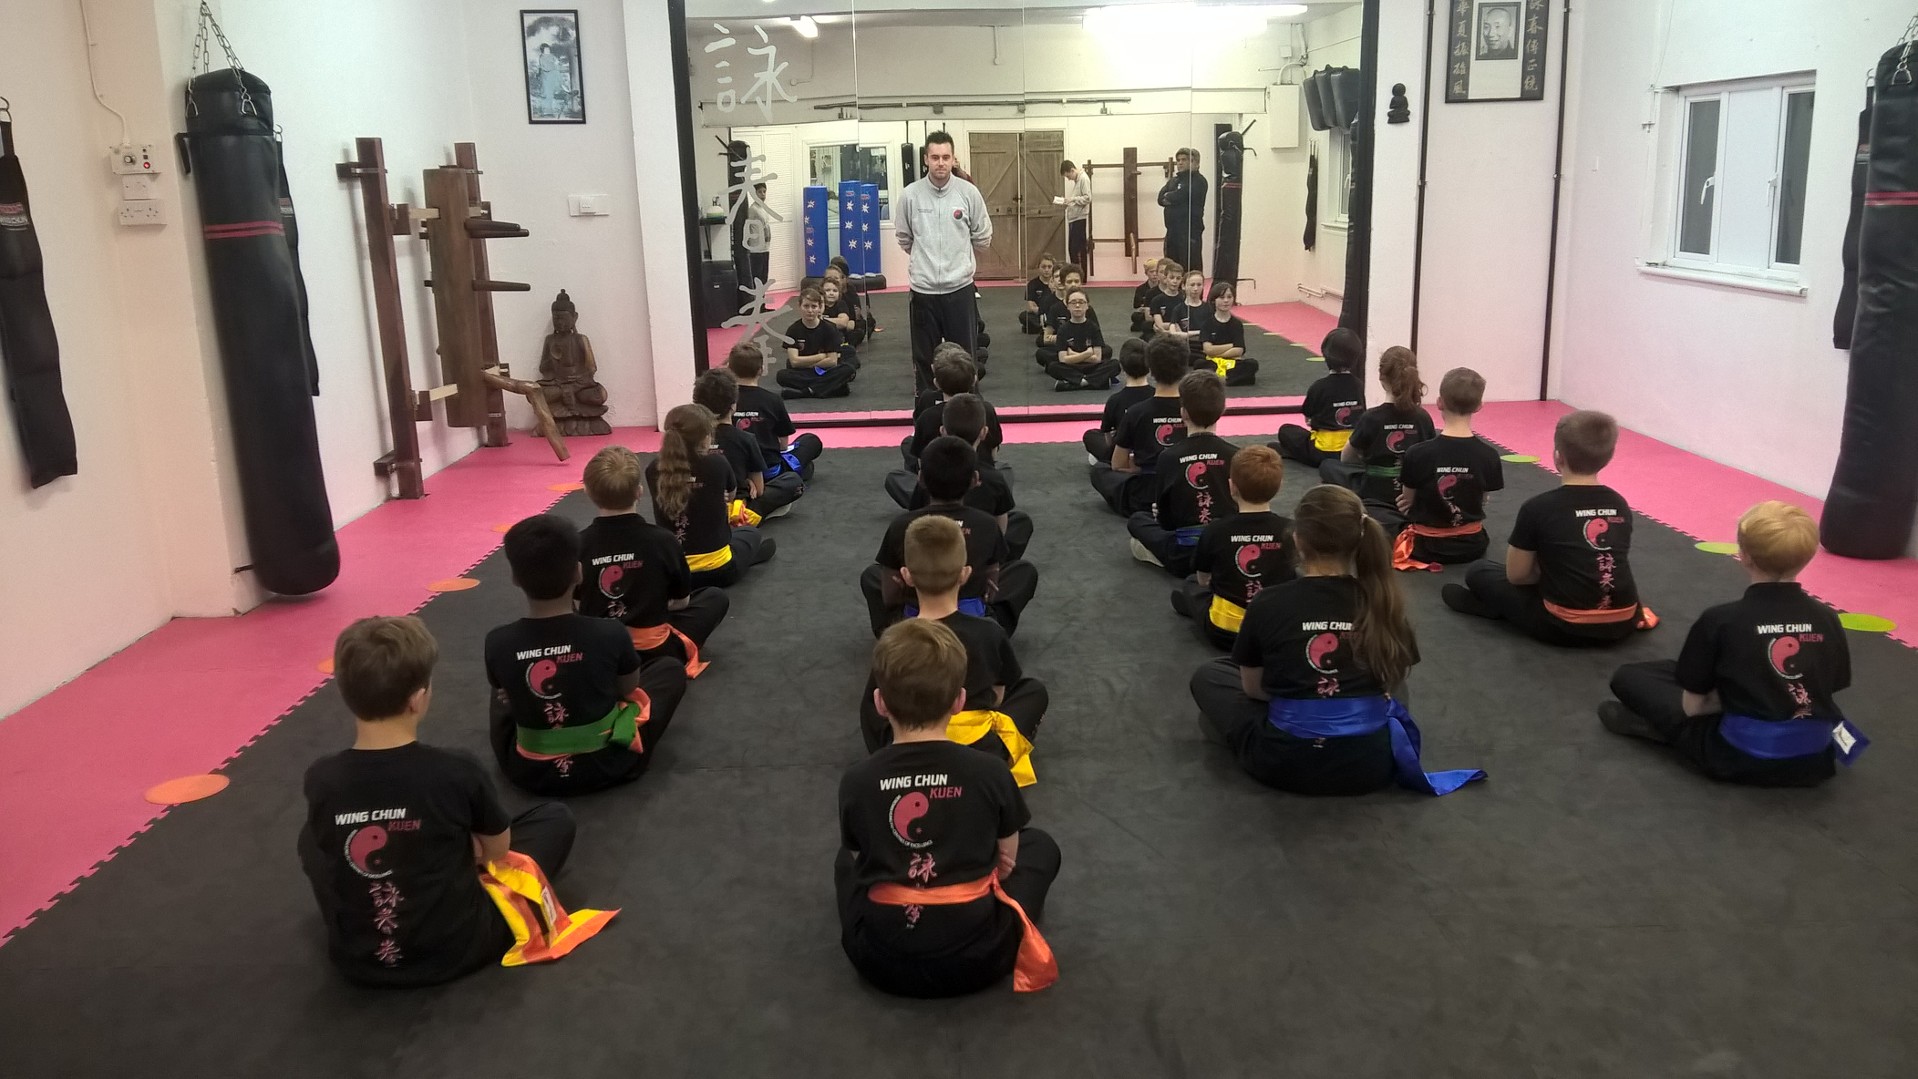 Children are attentive and keen to learn even before the class starts. A fun based Q and A session before the session begins helps focus and martial arts knowledge.